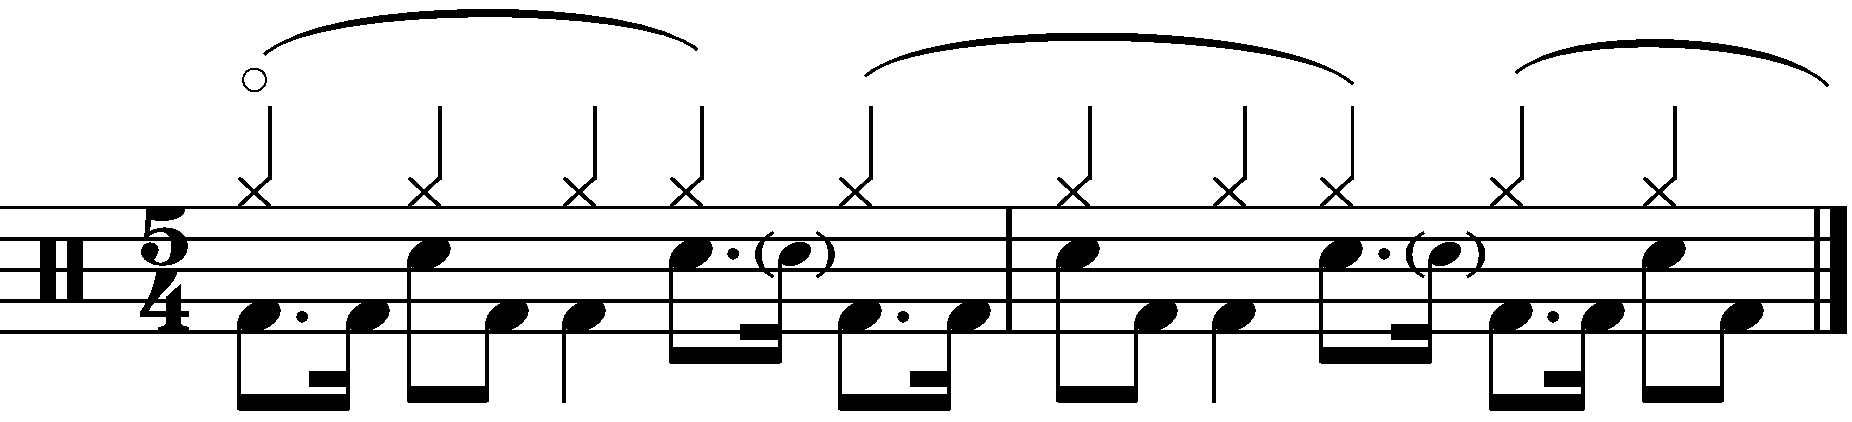 A 5/4 wrap around groove